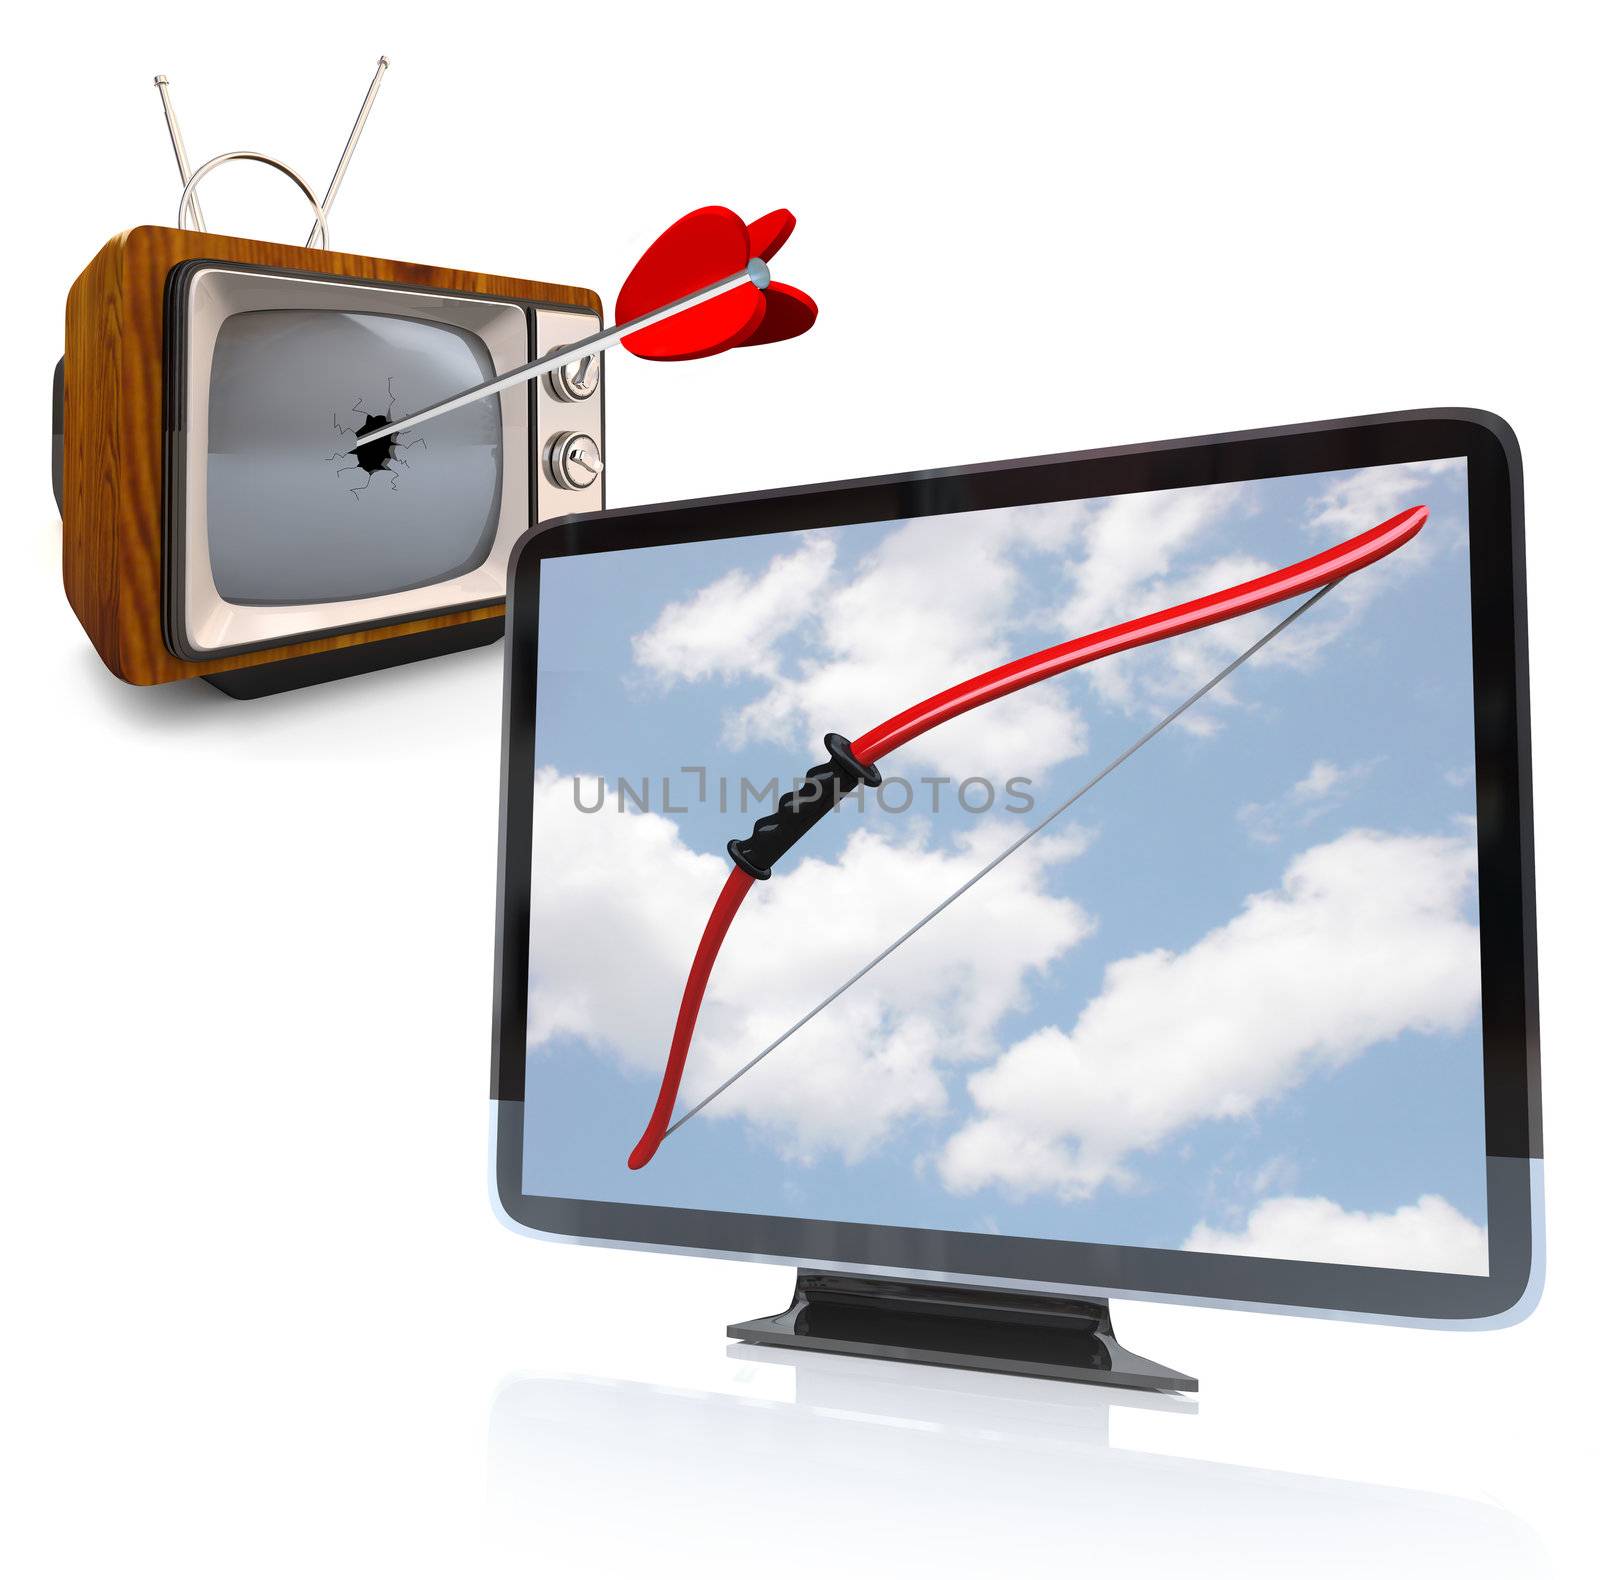 An HDTV with an archery bow and an old fashioned television with a broken screen hit by an arrow, symbolizing the death of traditional television